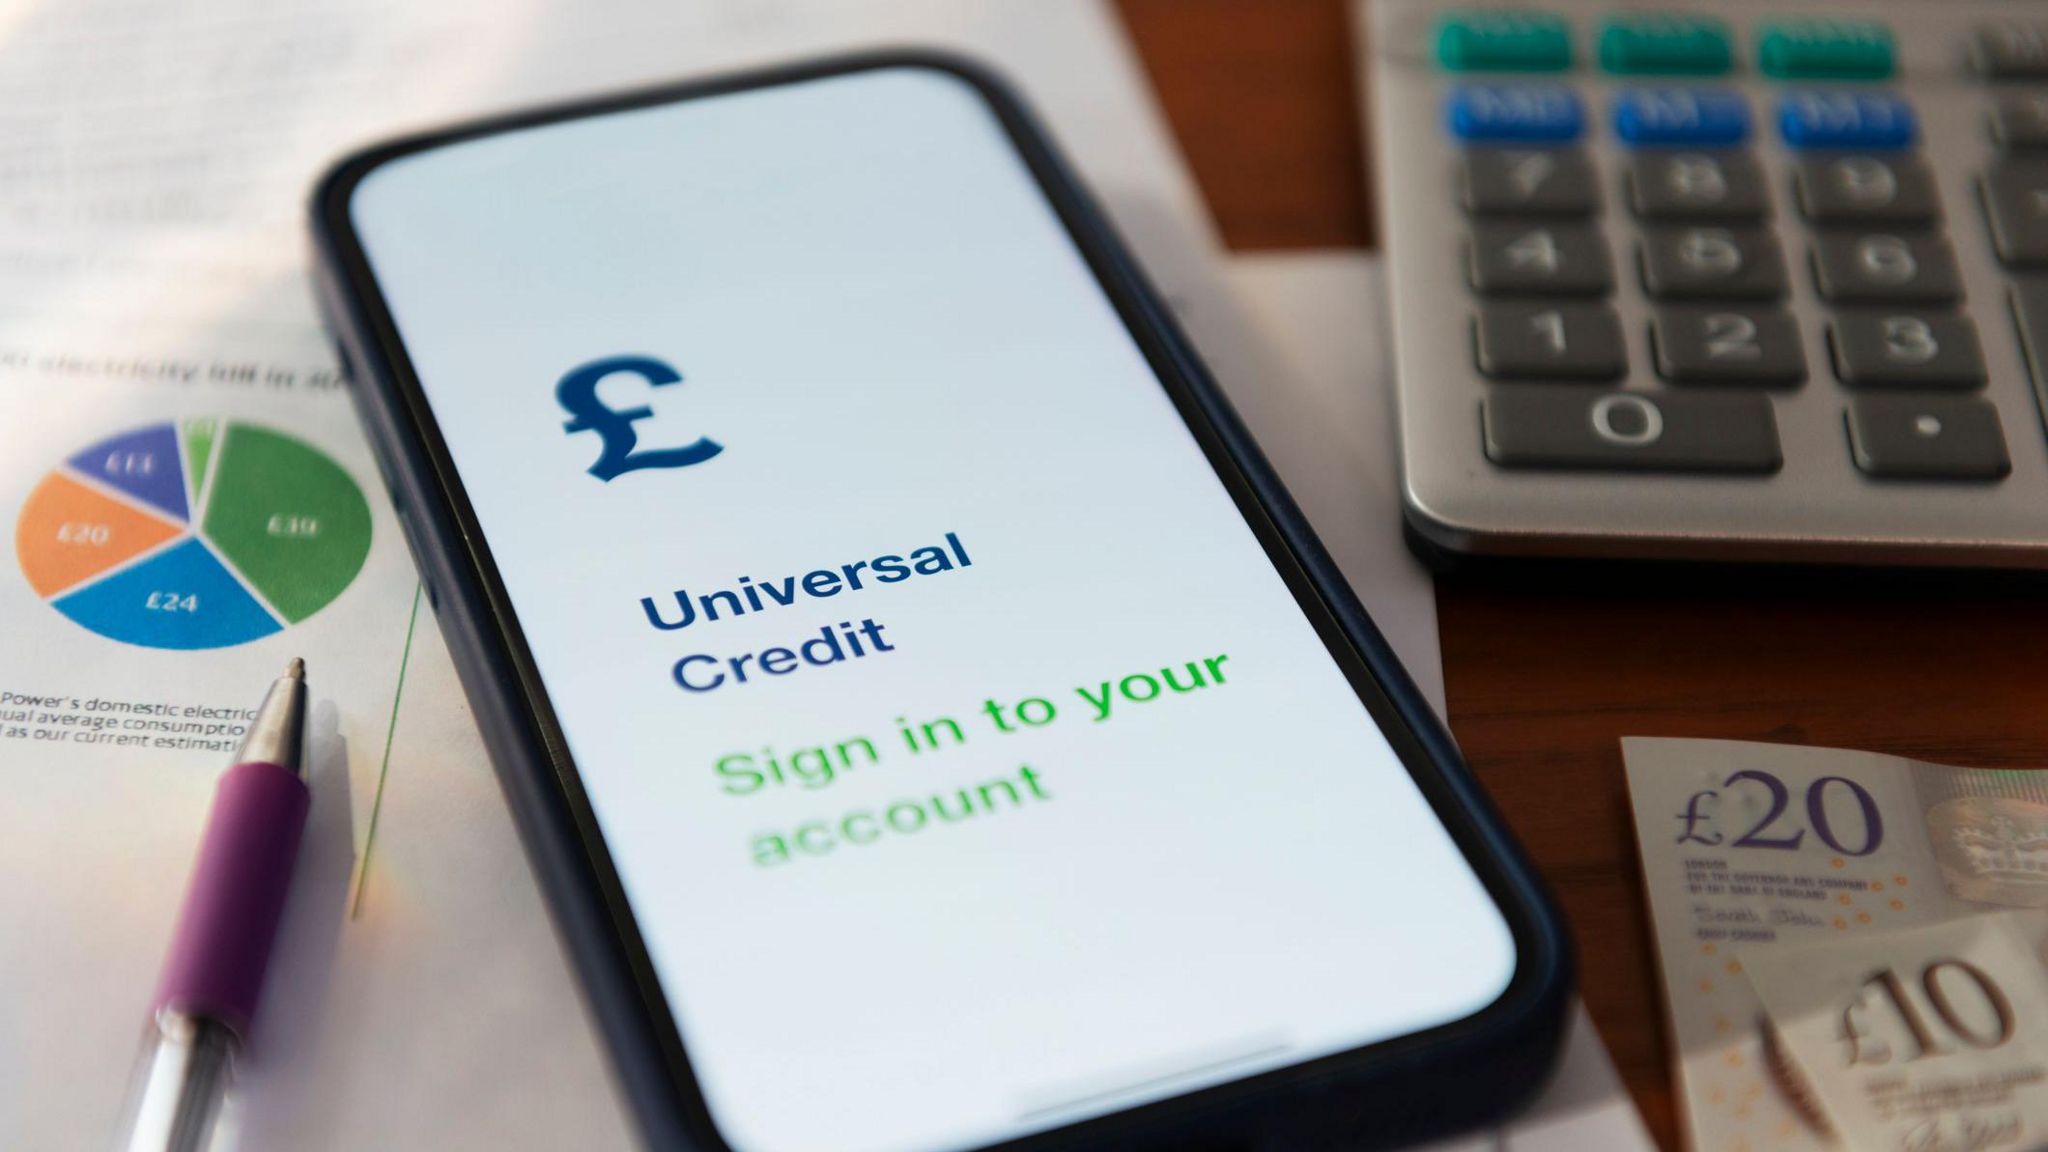 A smart phone open on a Universal Credit sign in page next to a calculator and some bank notes